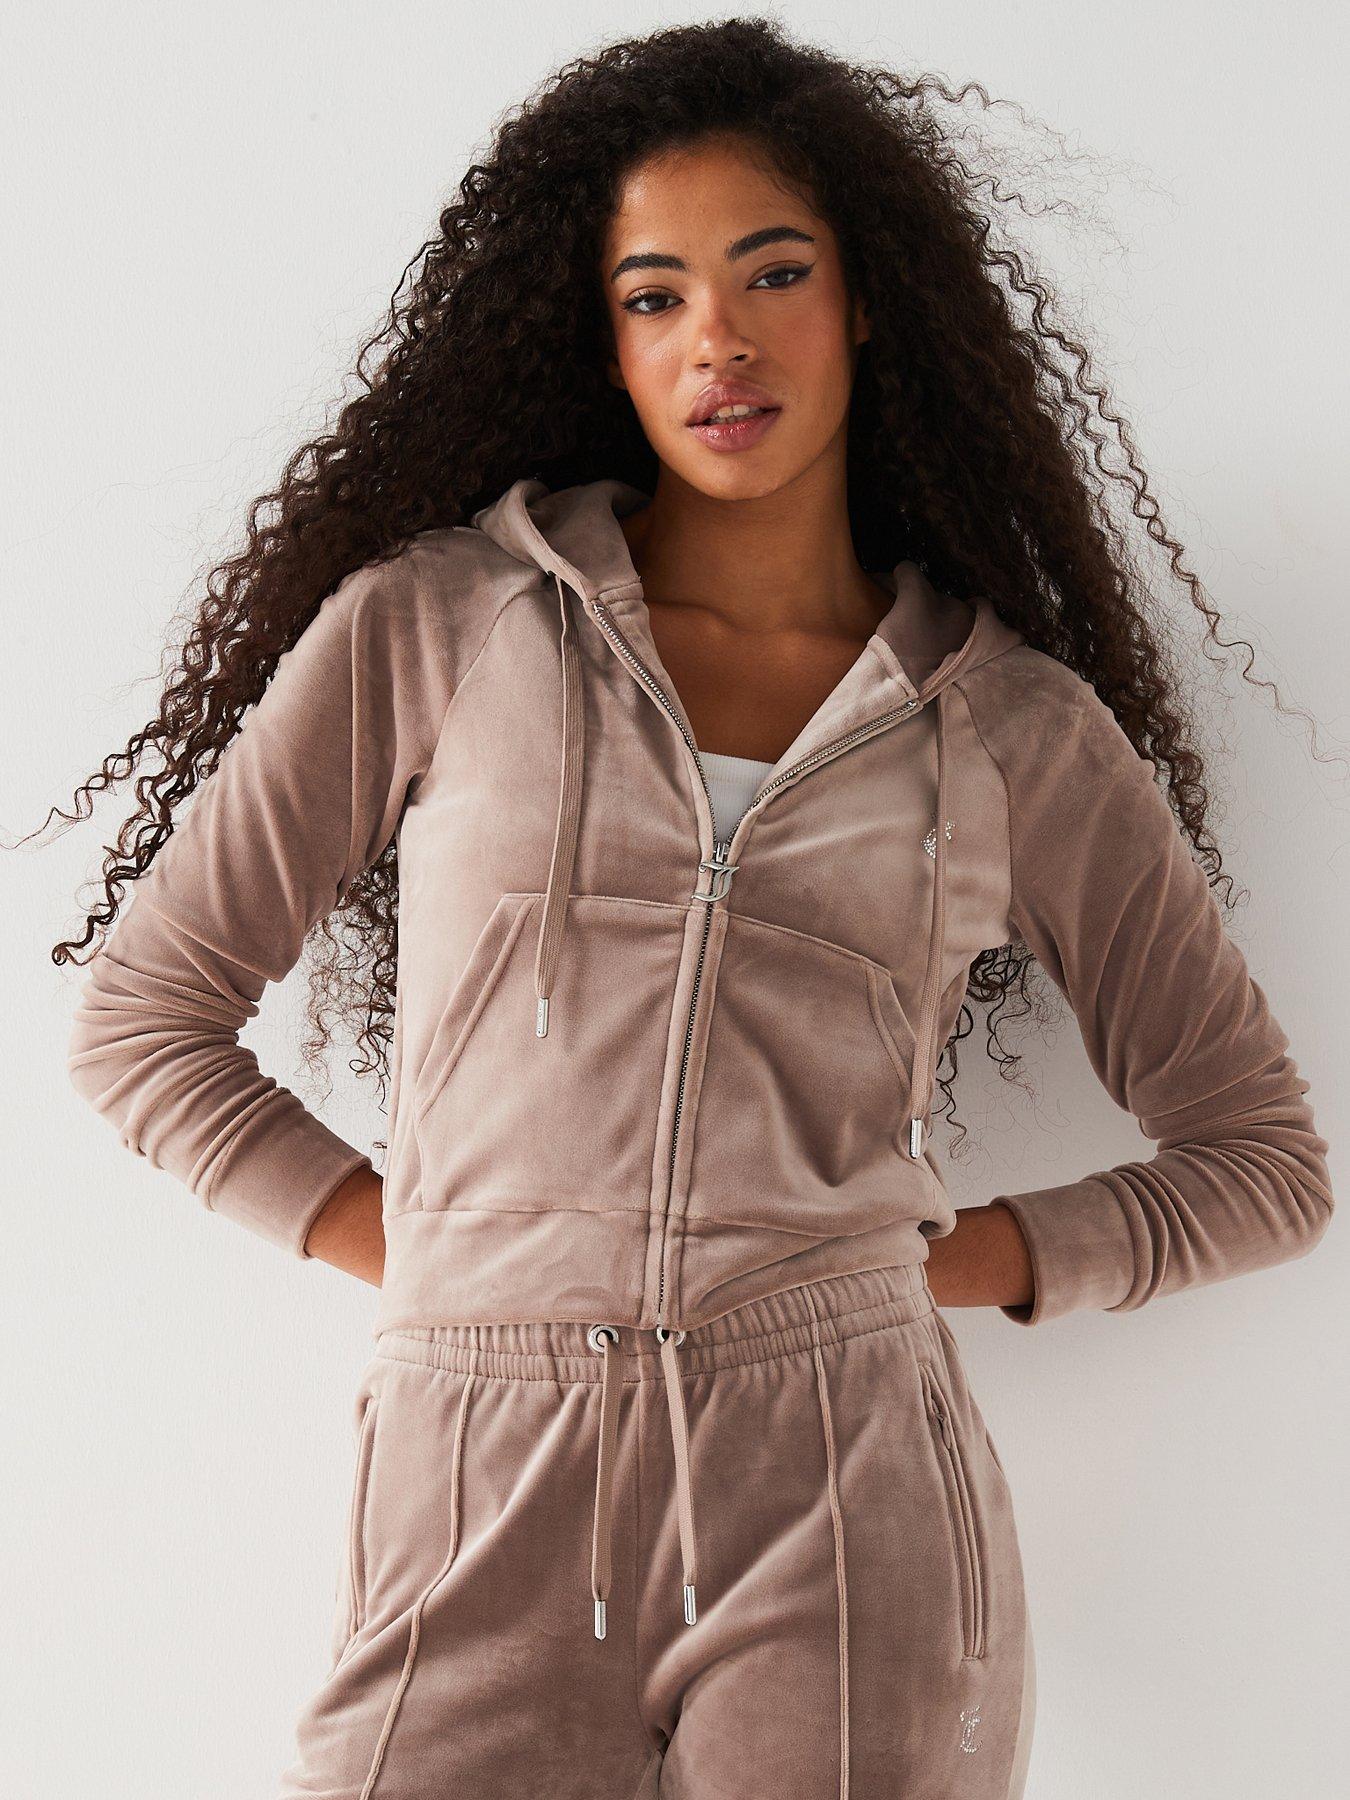 Juicy couture 2 NEW Medium LONG/TALL Tracksuit Set